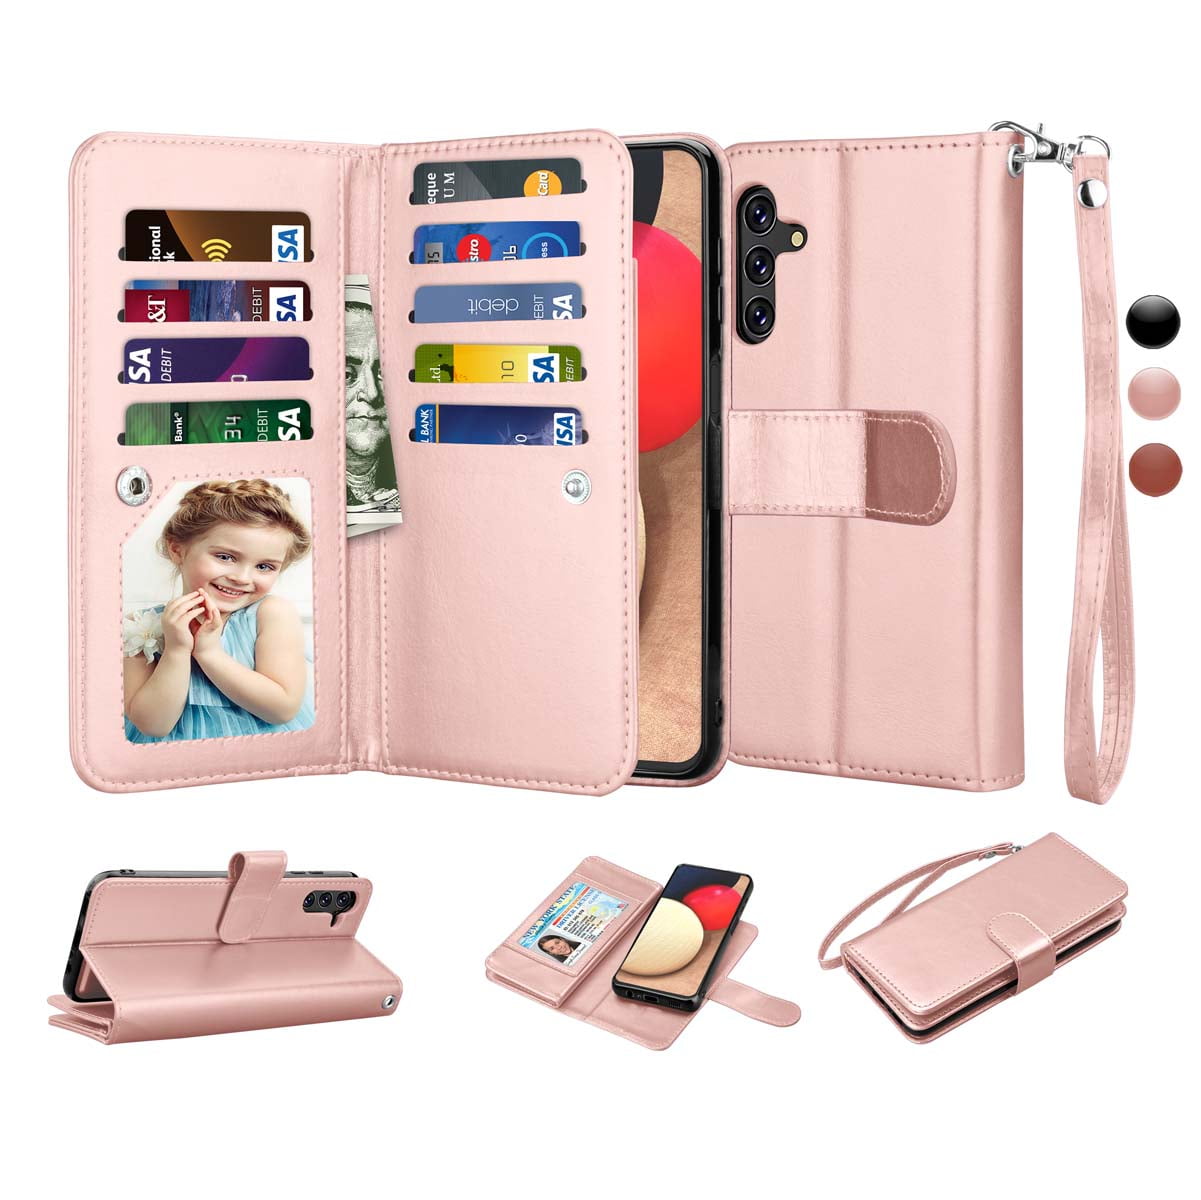 Samsung Galaxy S20 Plus Case Shockproof PU Leather Flip Notebook Wallet Case with Magnetic Closure Kickstand Card Holder ID Slots Folio Slim Soft TPU Bumper Protective Skin Cover Tiger